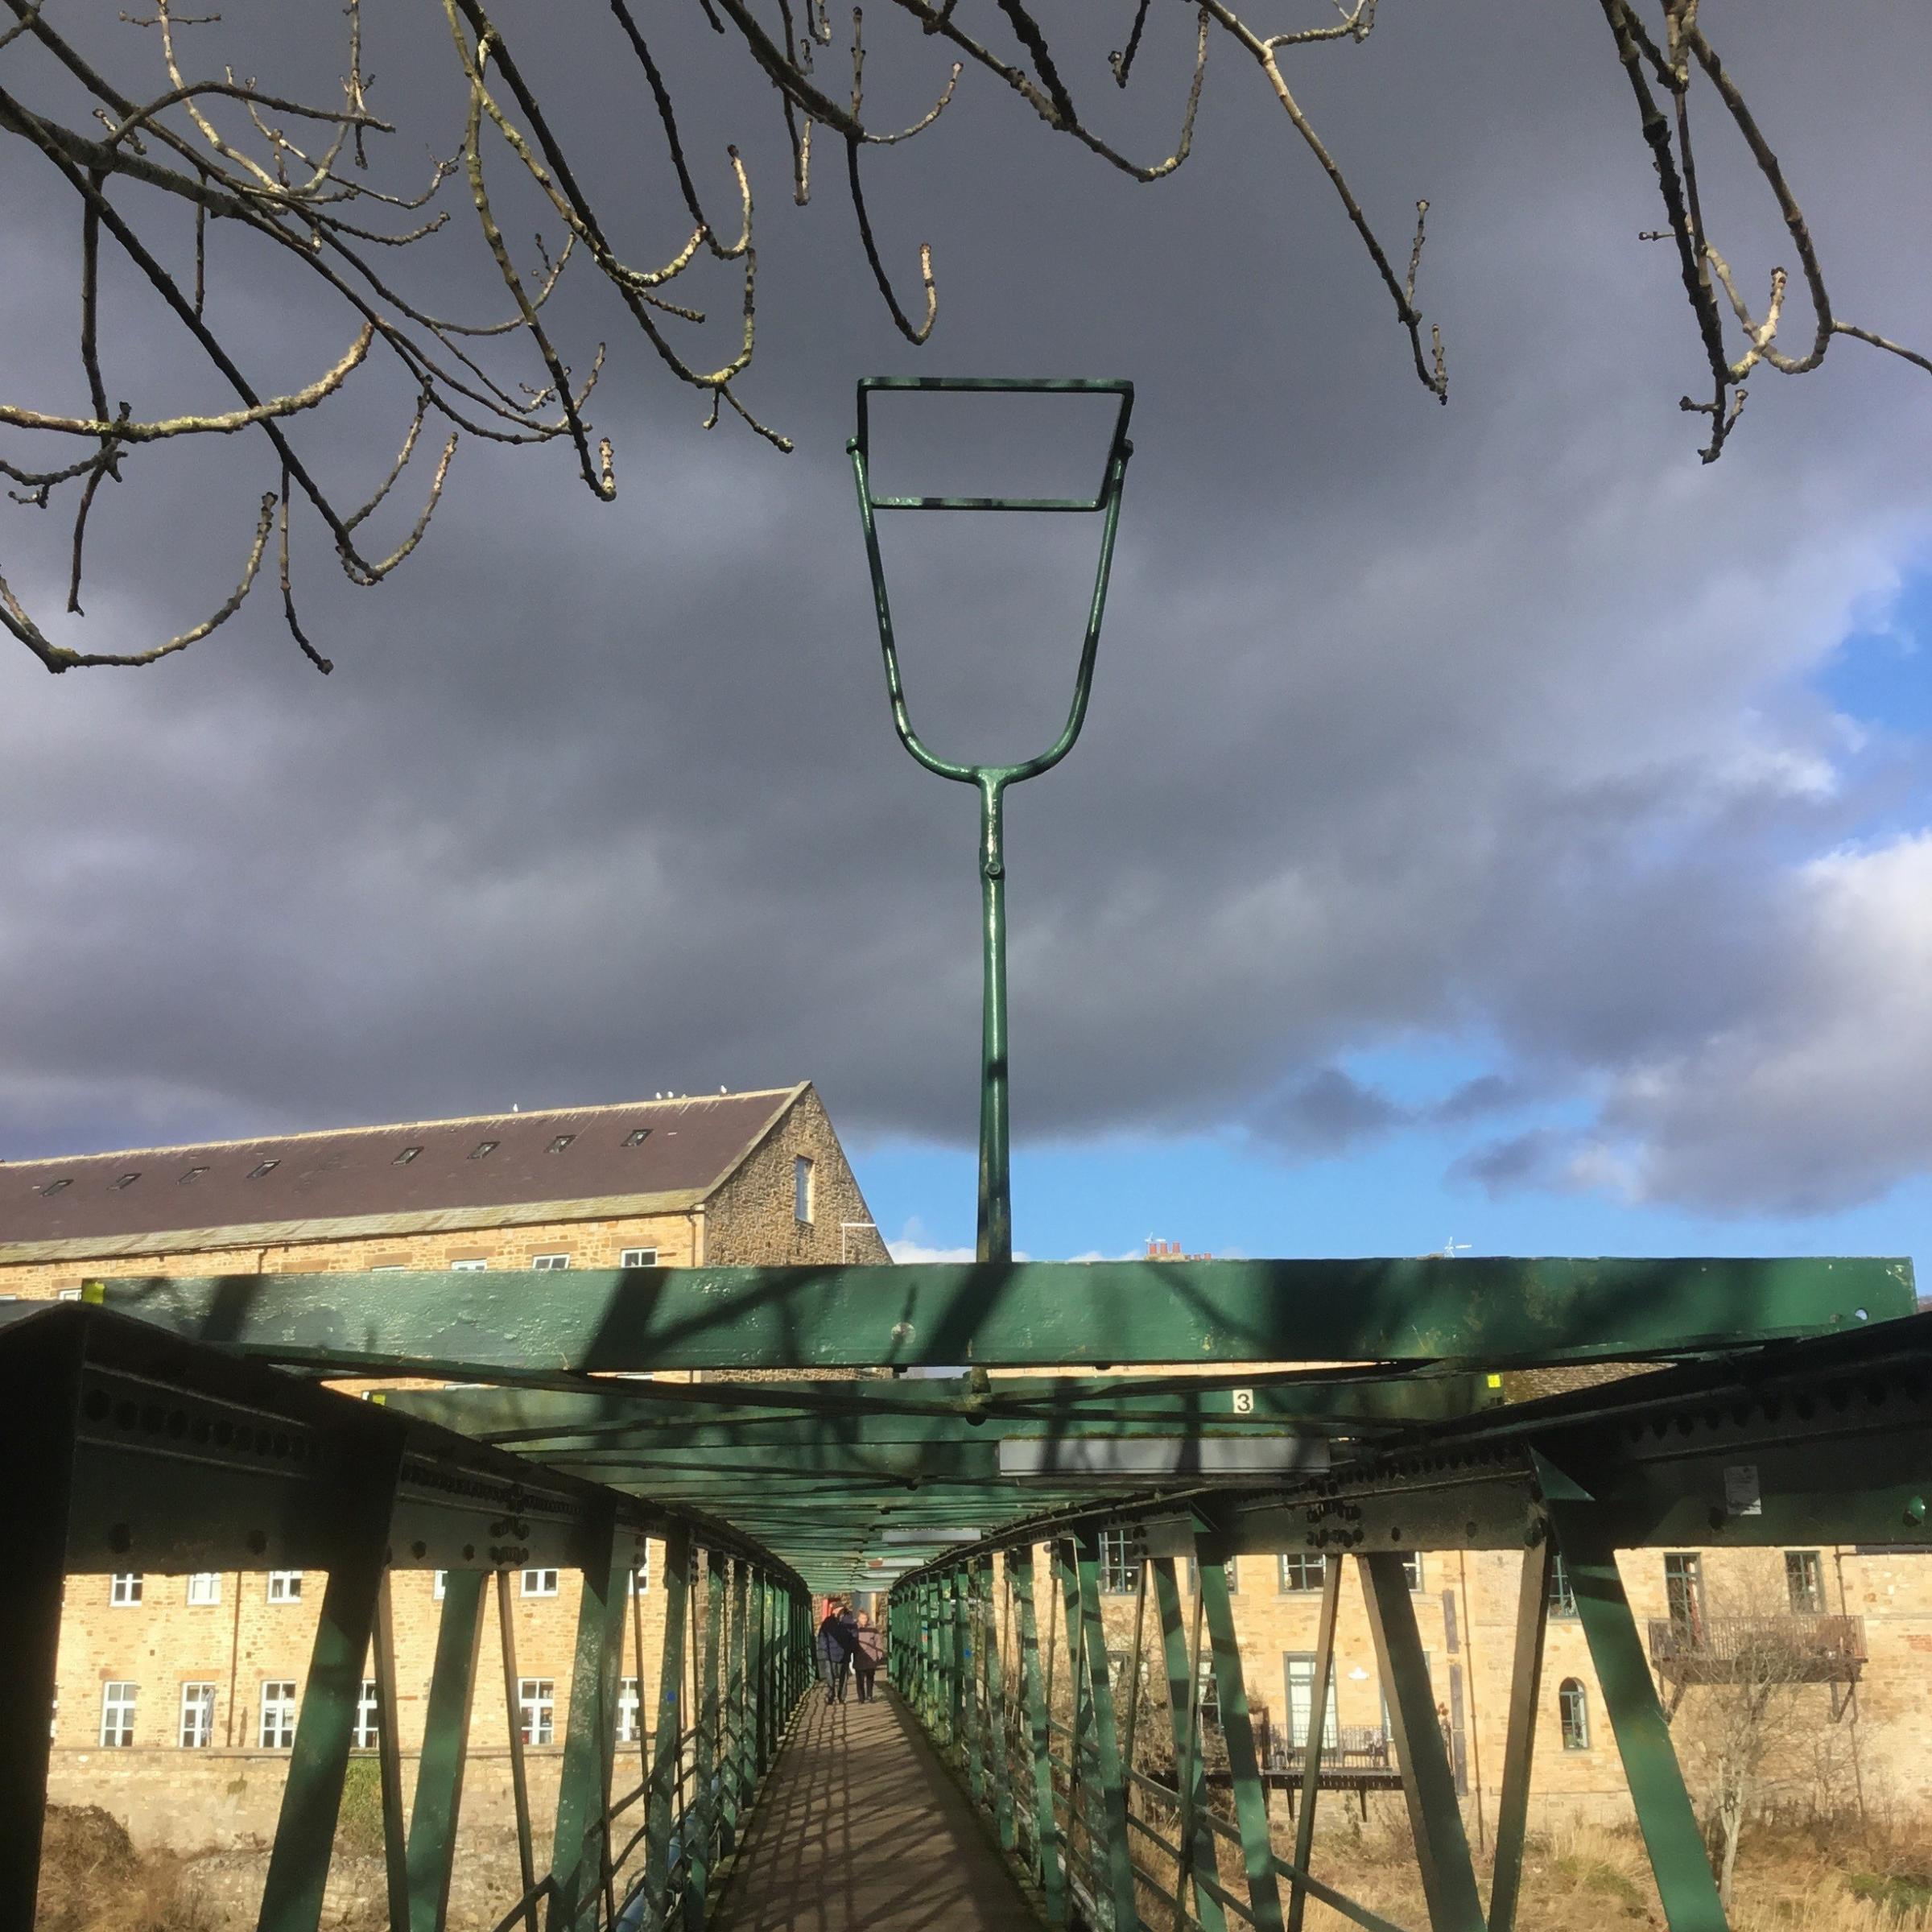 The oil lamp brackets at either end of Thorngate Bridge in Barnard Castle, as photographed by Laura Angel